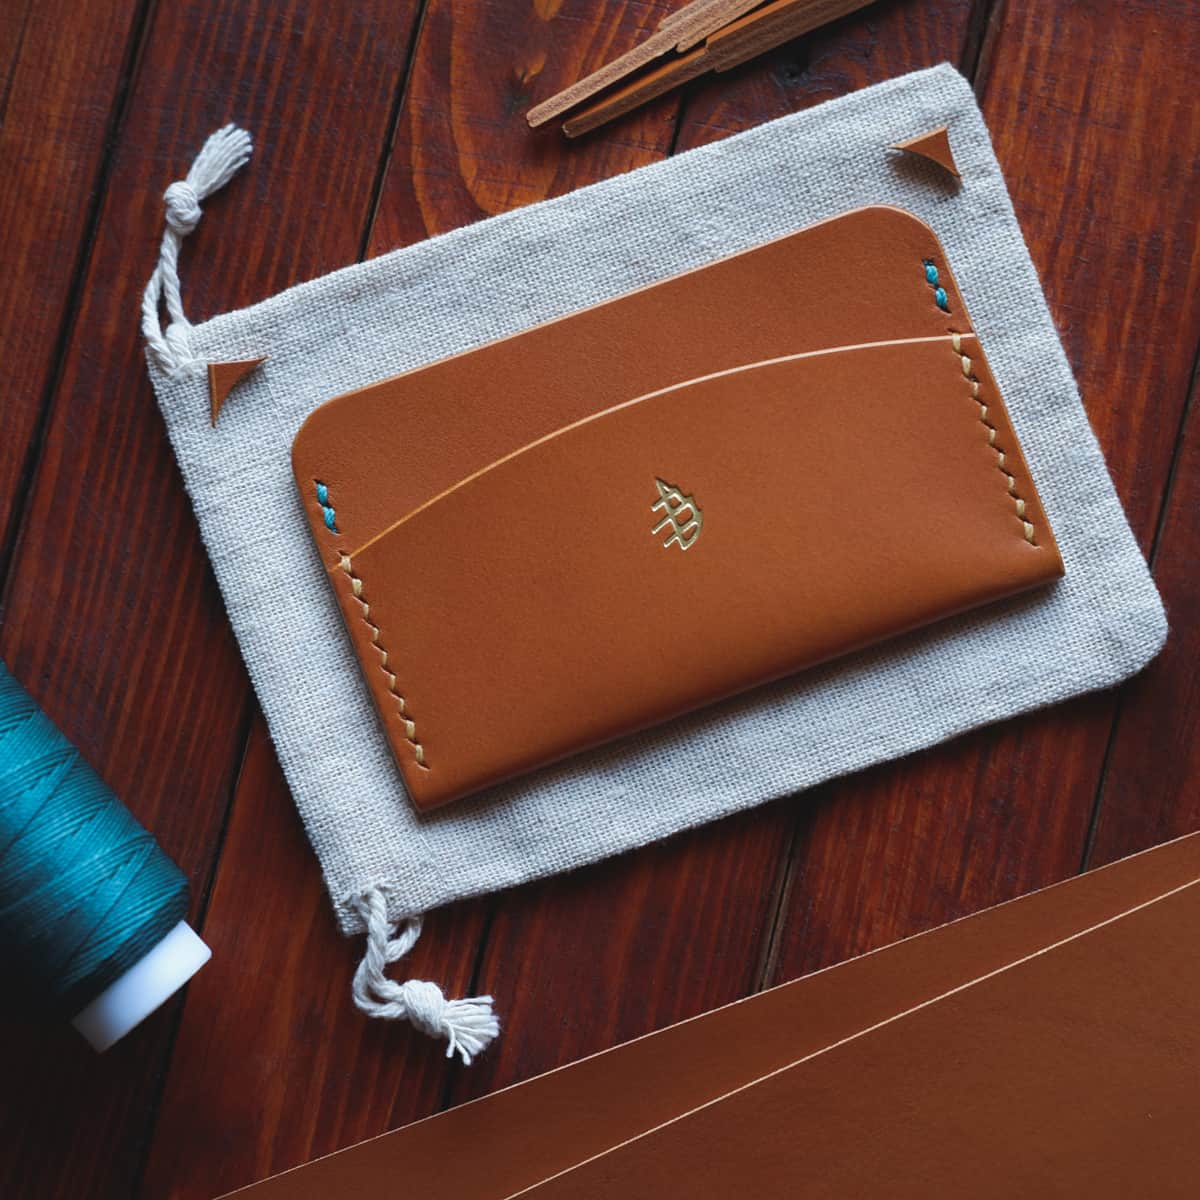 Tabletop view of The Mountain Card Holder in light brown aniline vegetable tanned leather